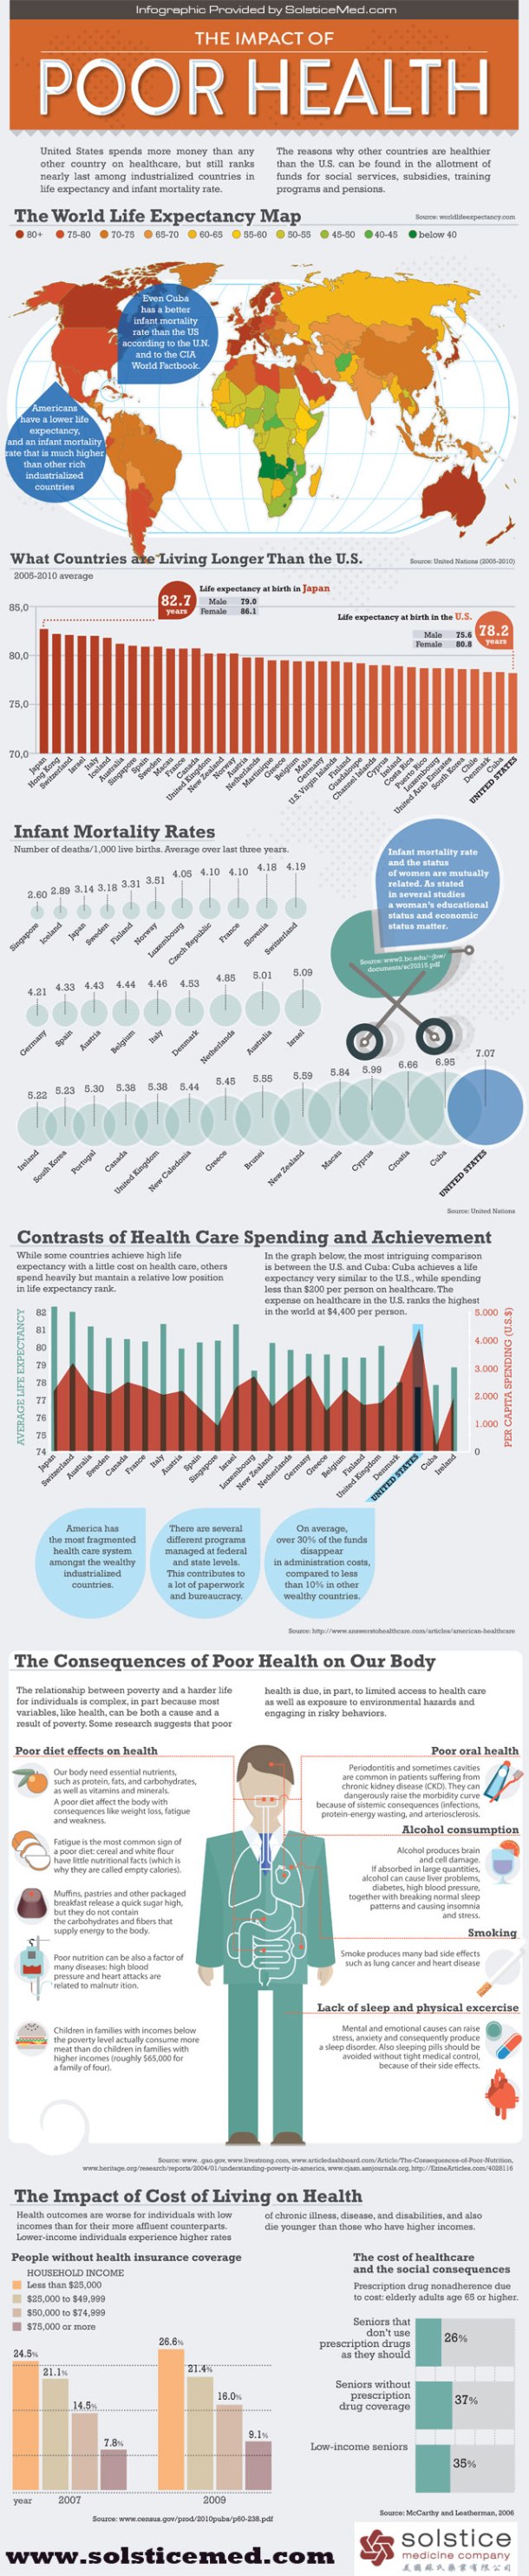 Poor-Health-in-America-Infographic